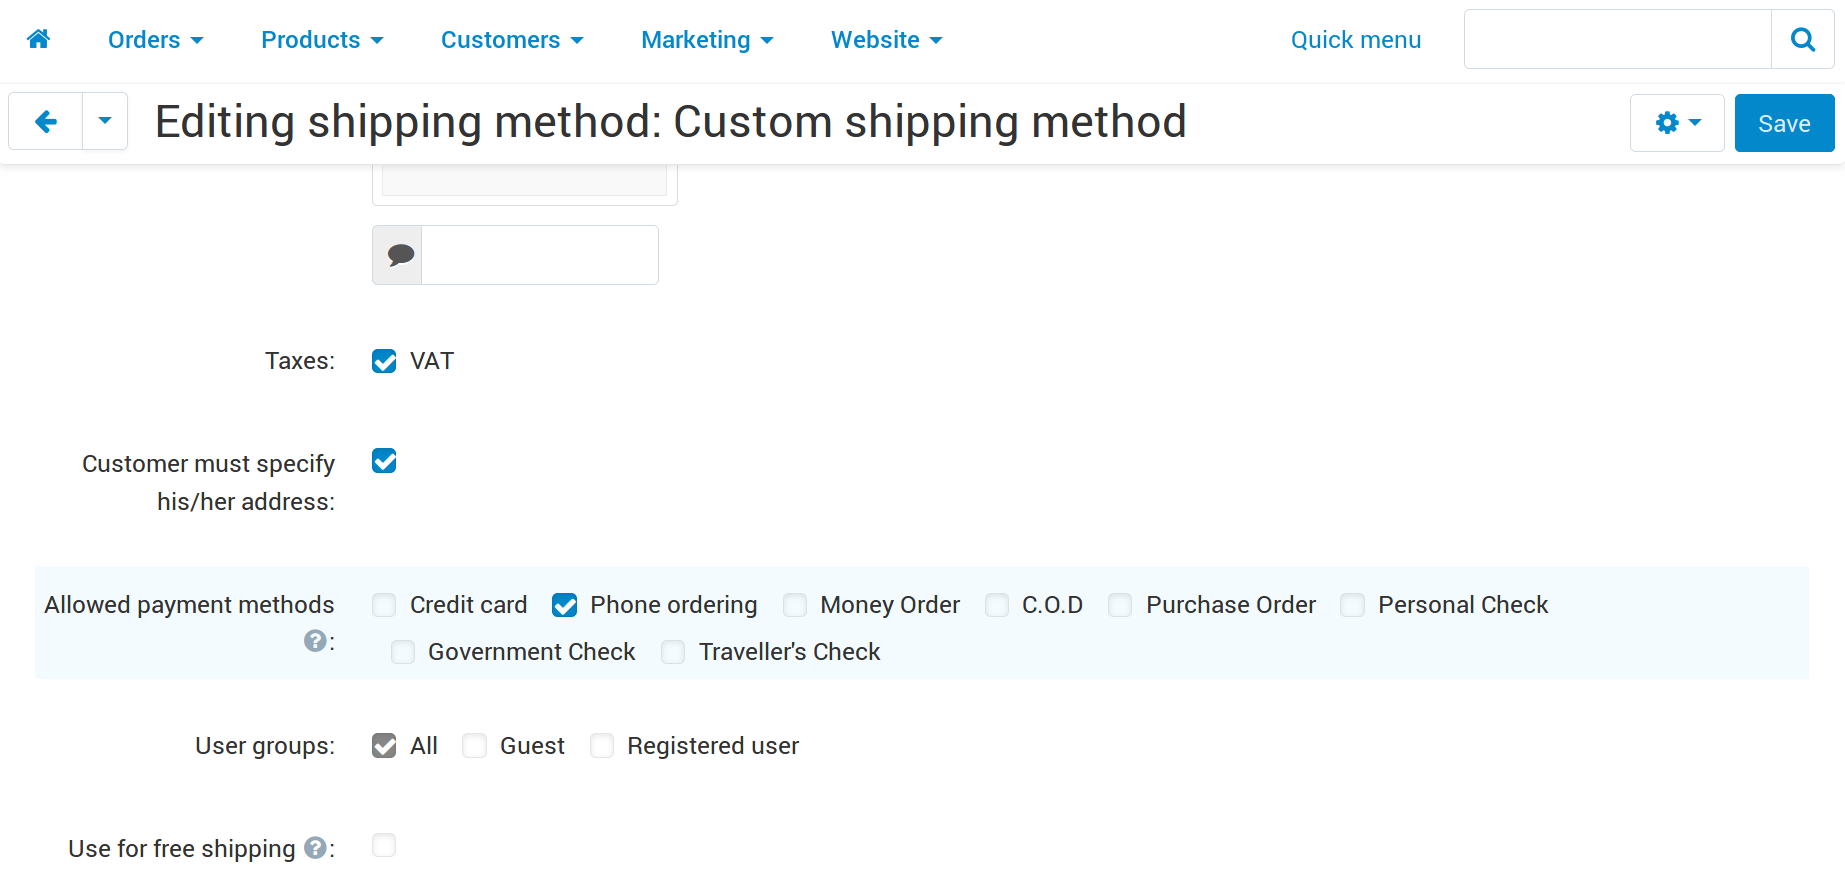 Select the payment methods you want to make available for the shipping method.